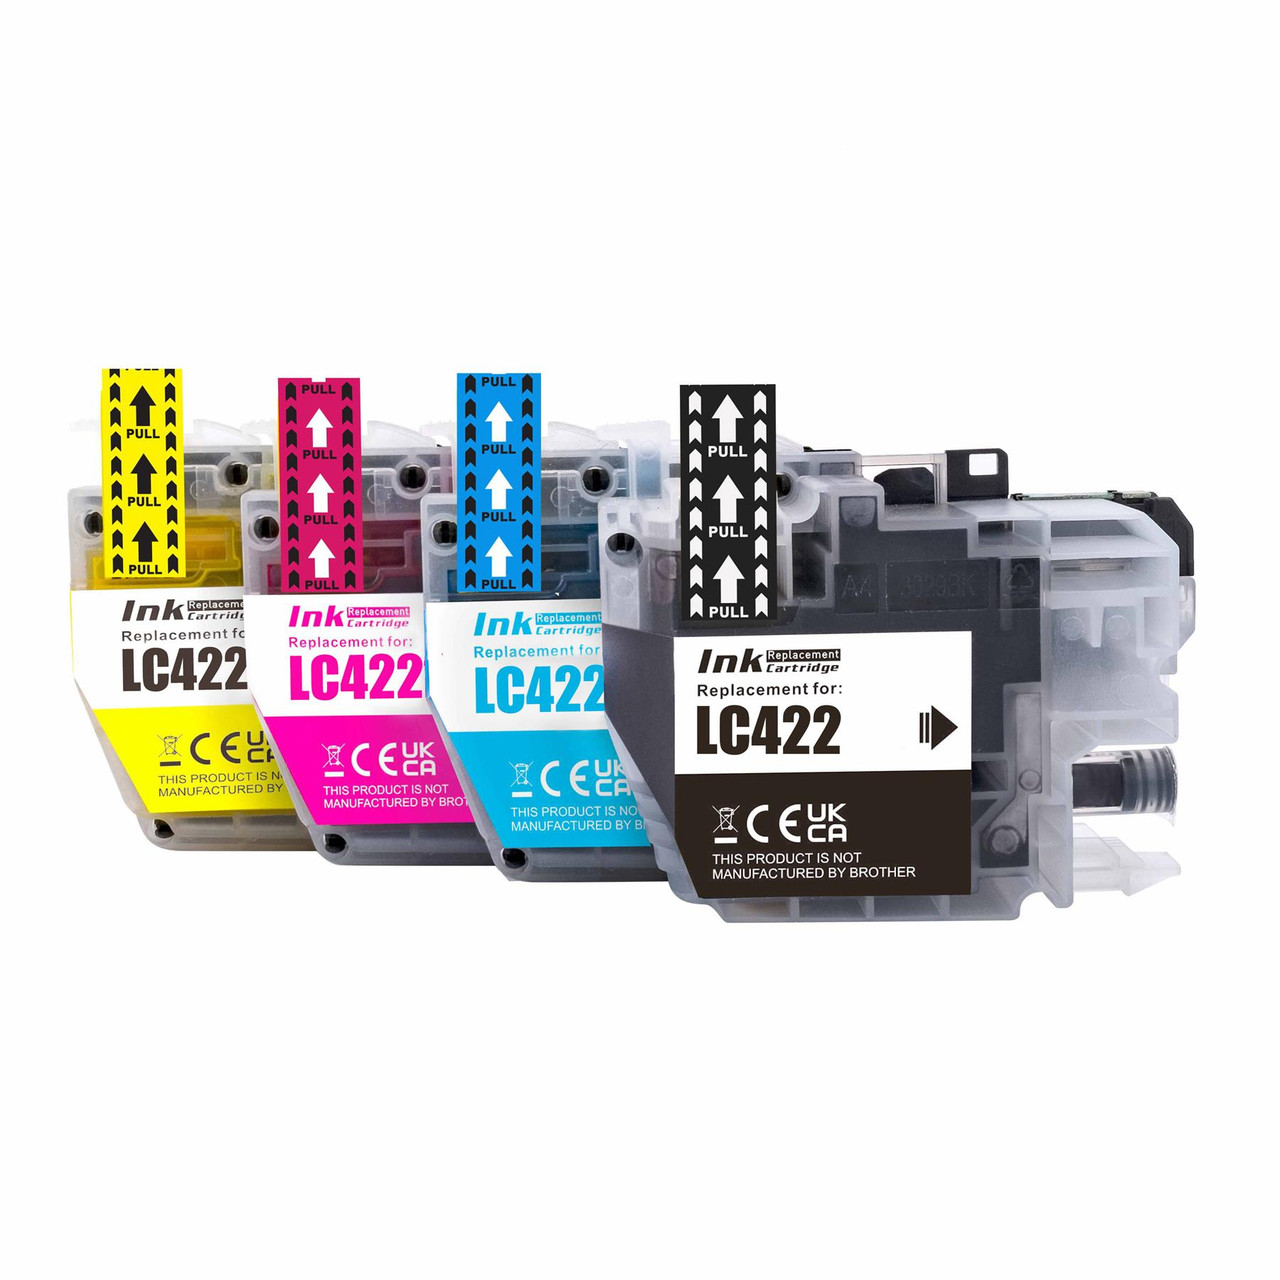 Compatible Brother LC422 - 1 Set of 4 Ink Cartridges from Go Inks (4 Inks)